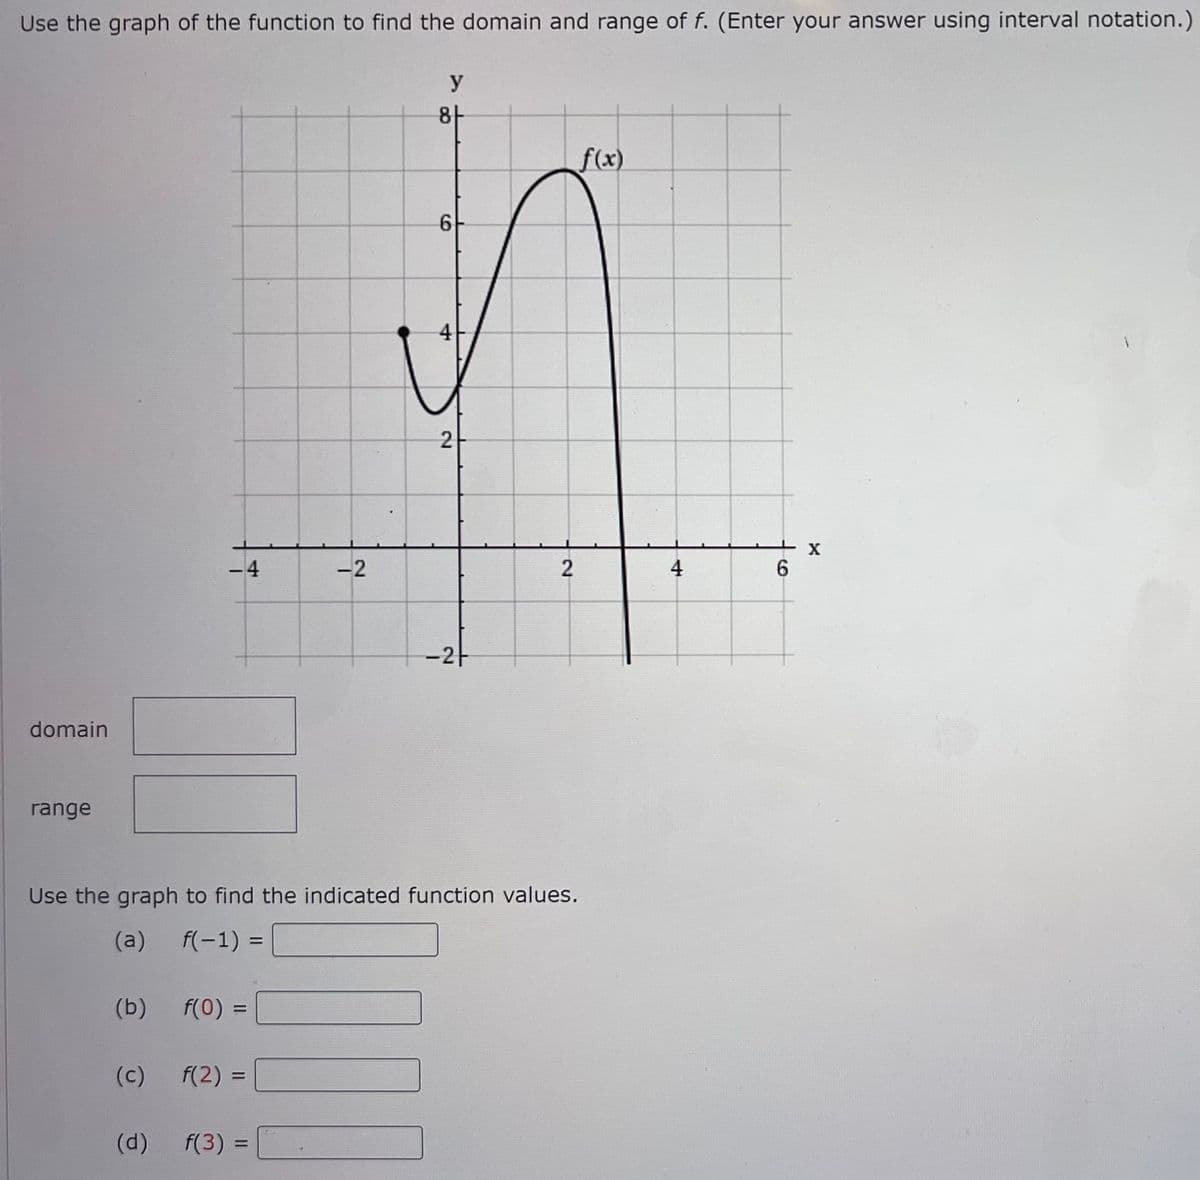 Use the graph of the function to find the domain and range of f. (Enter your answer using interval notation.)
y
f(x)
-4
=
-2
=
-2
domain
range
Use the graph to find the indicated function values.
(a)
f(-1):
(b) f(0) =
=
(c)
f(2)=
(d) f(3)
8
6
4
2
117
2
4
6
X